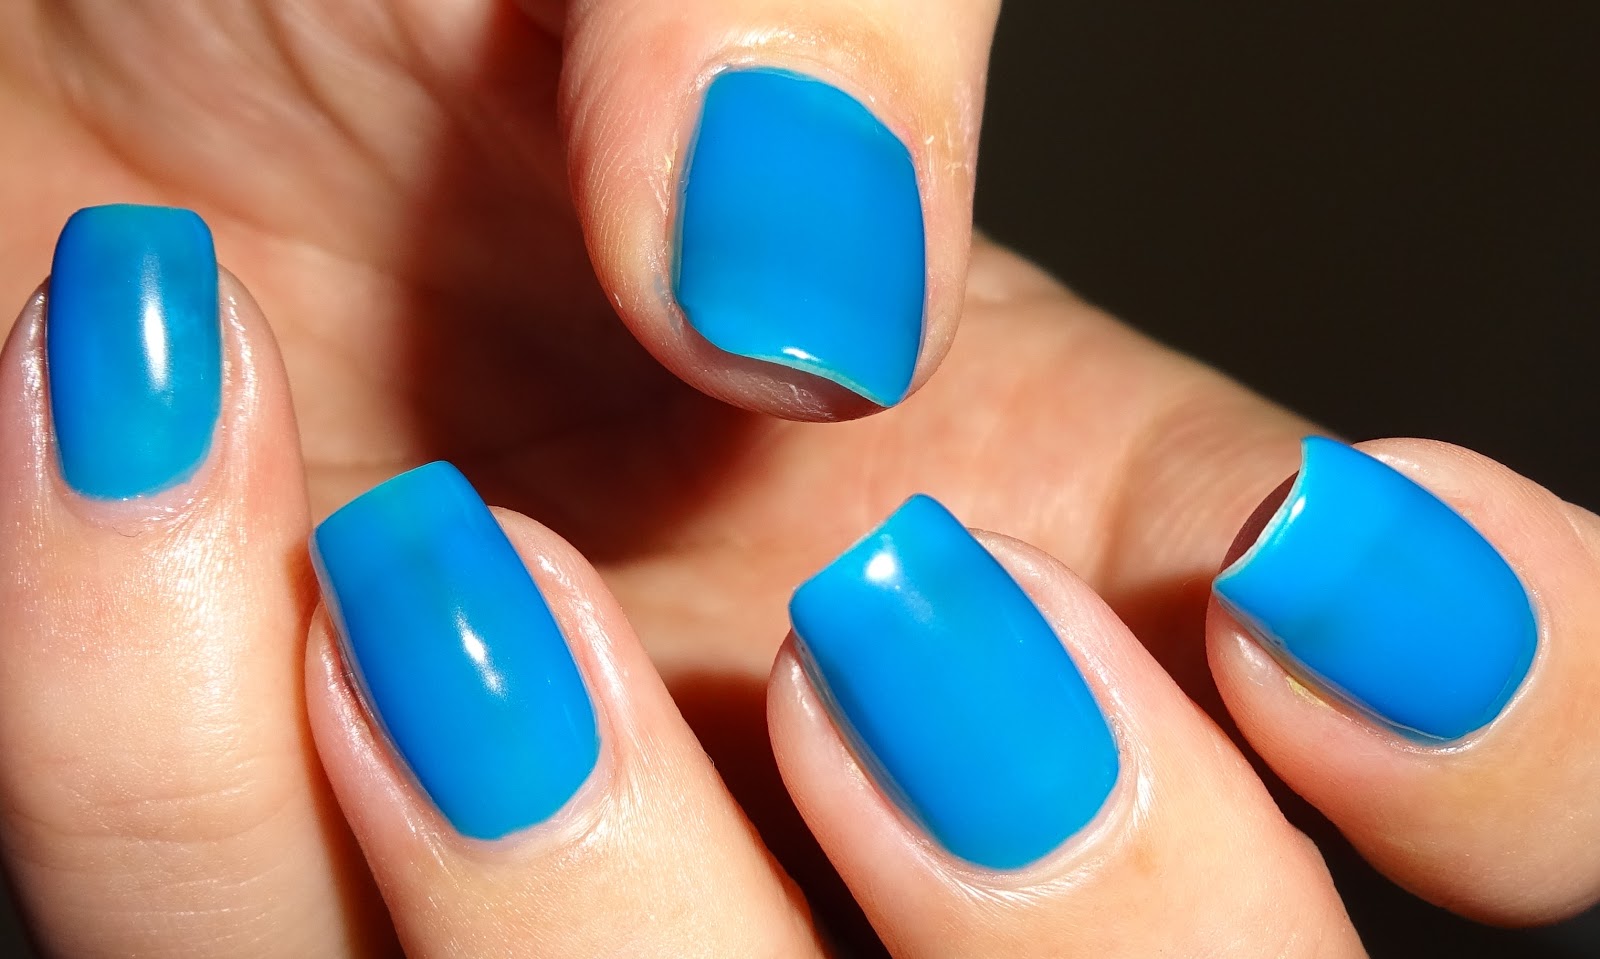 5. "Best light blue nail polish for cool undertones" - wide 6